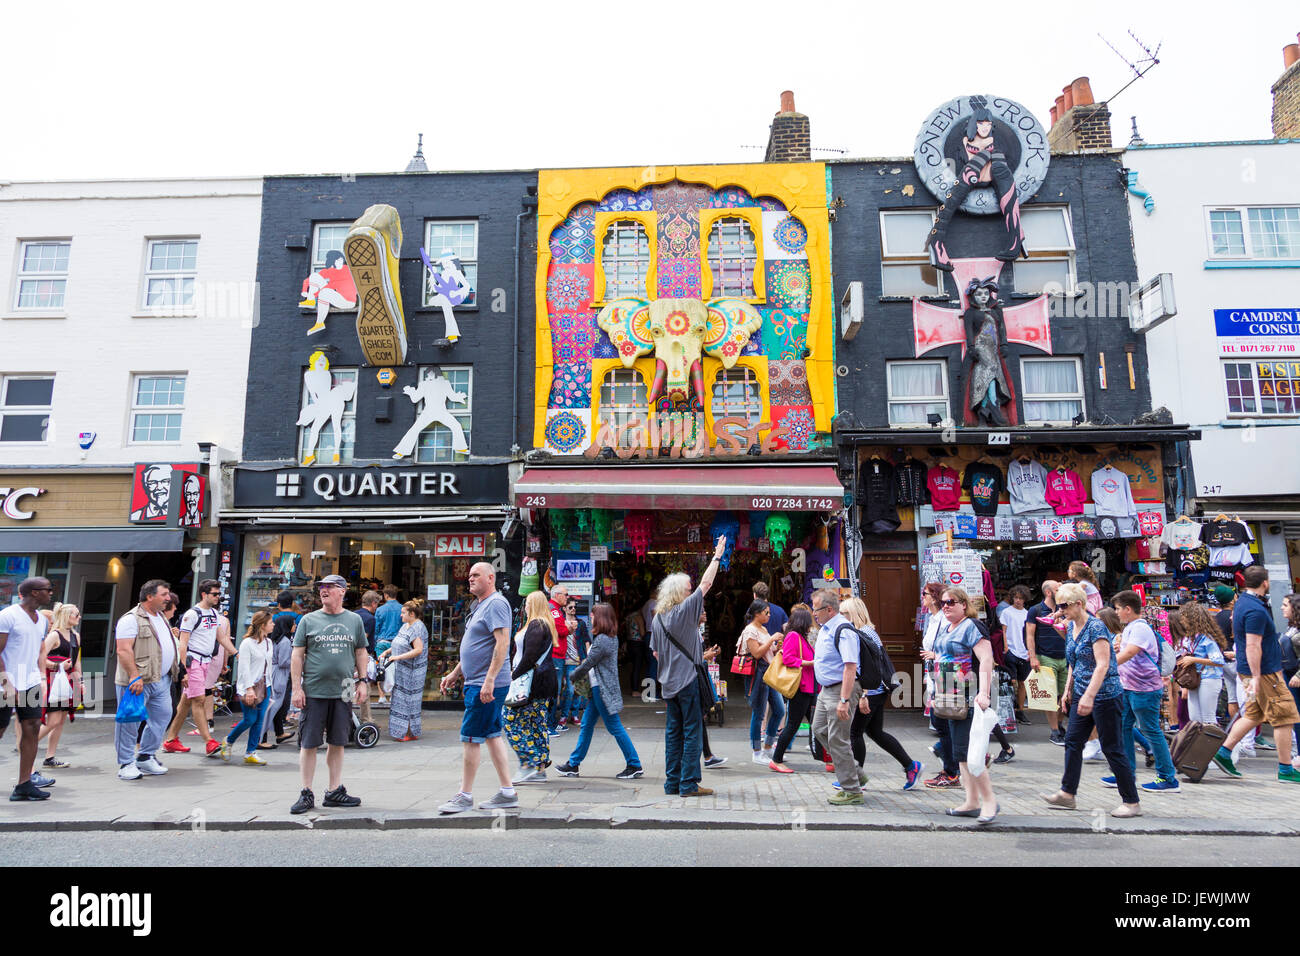 Crowds and colourful arty shop fronts in Camden Market, London, UK Stock Photo